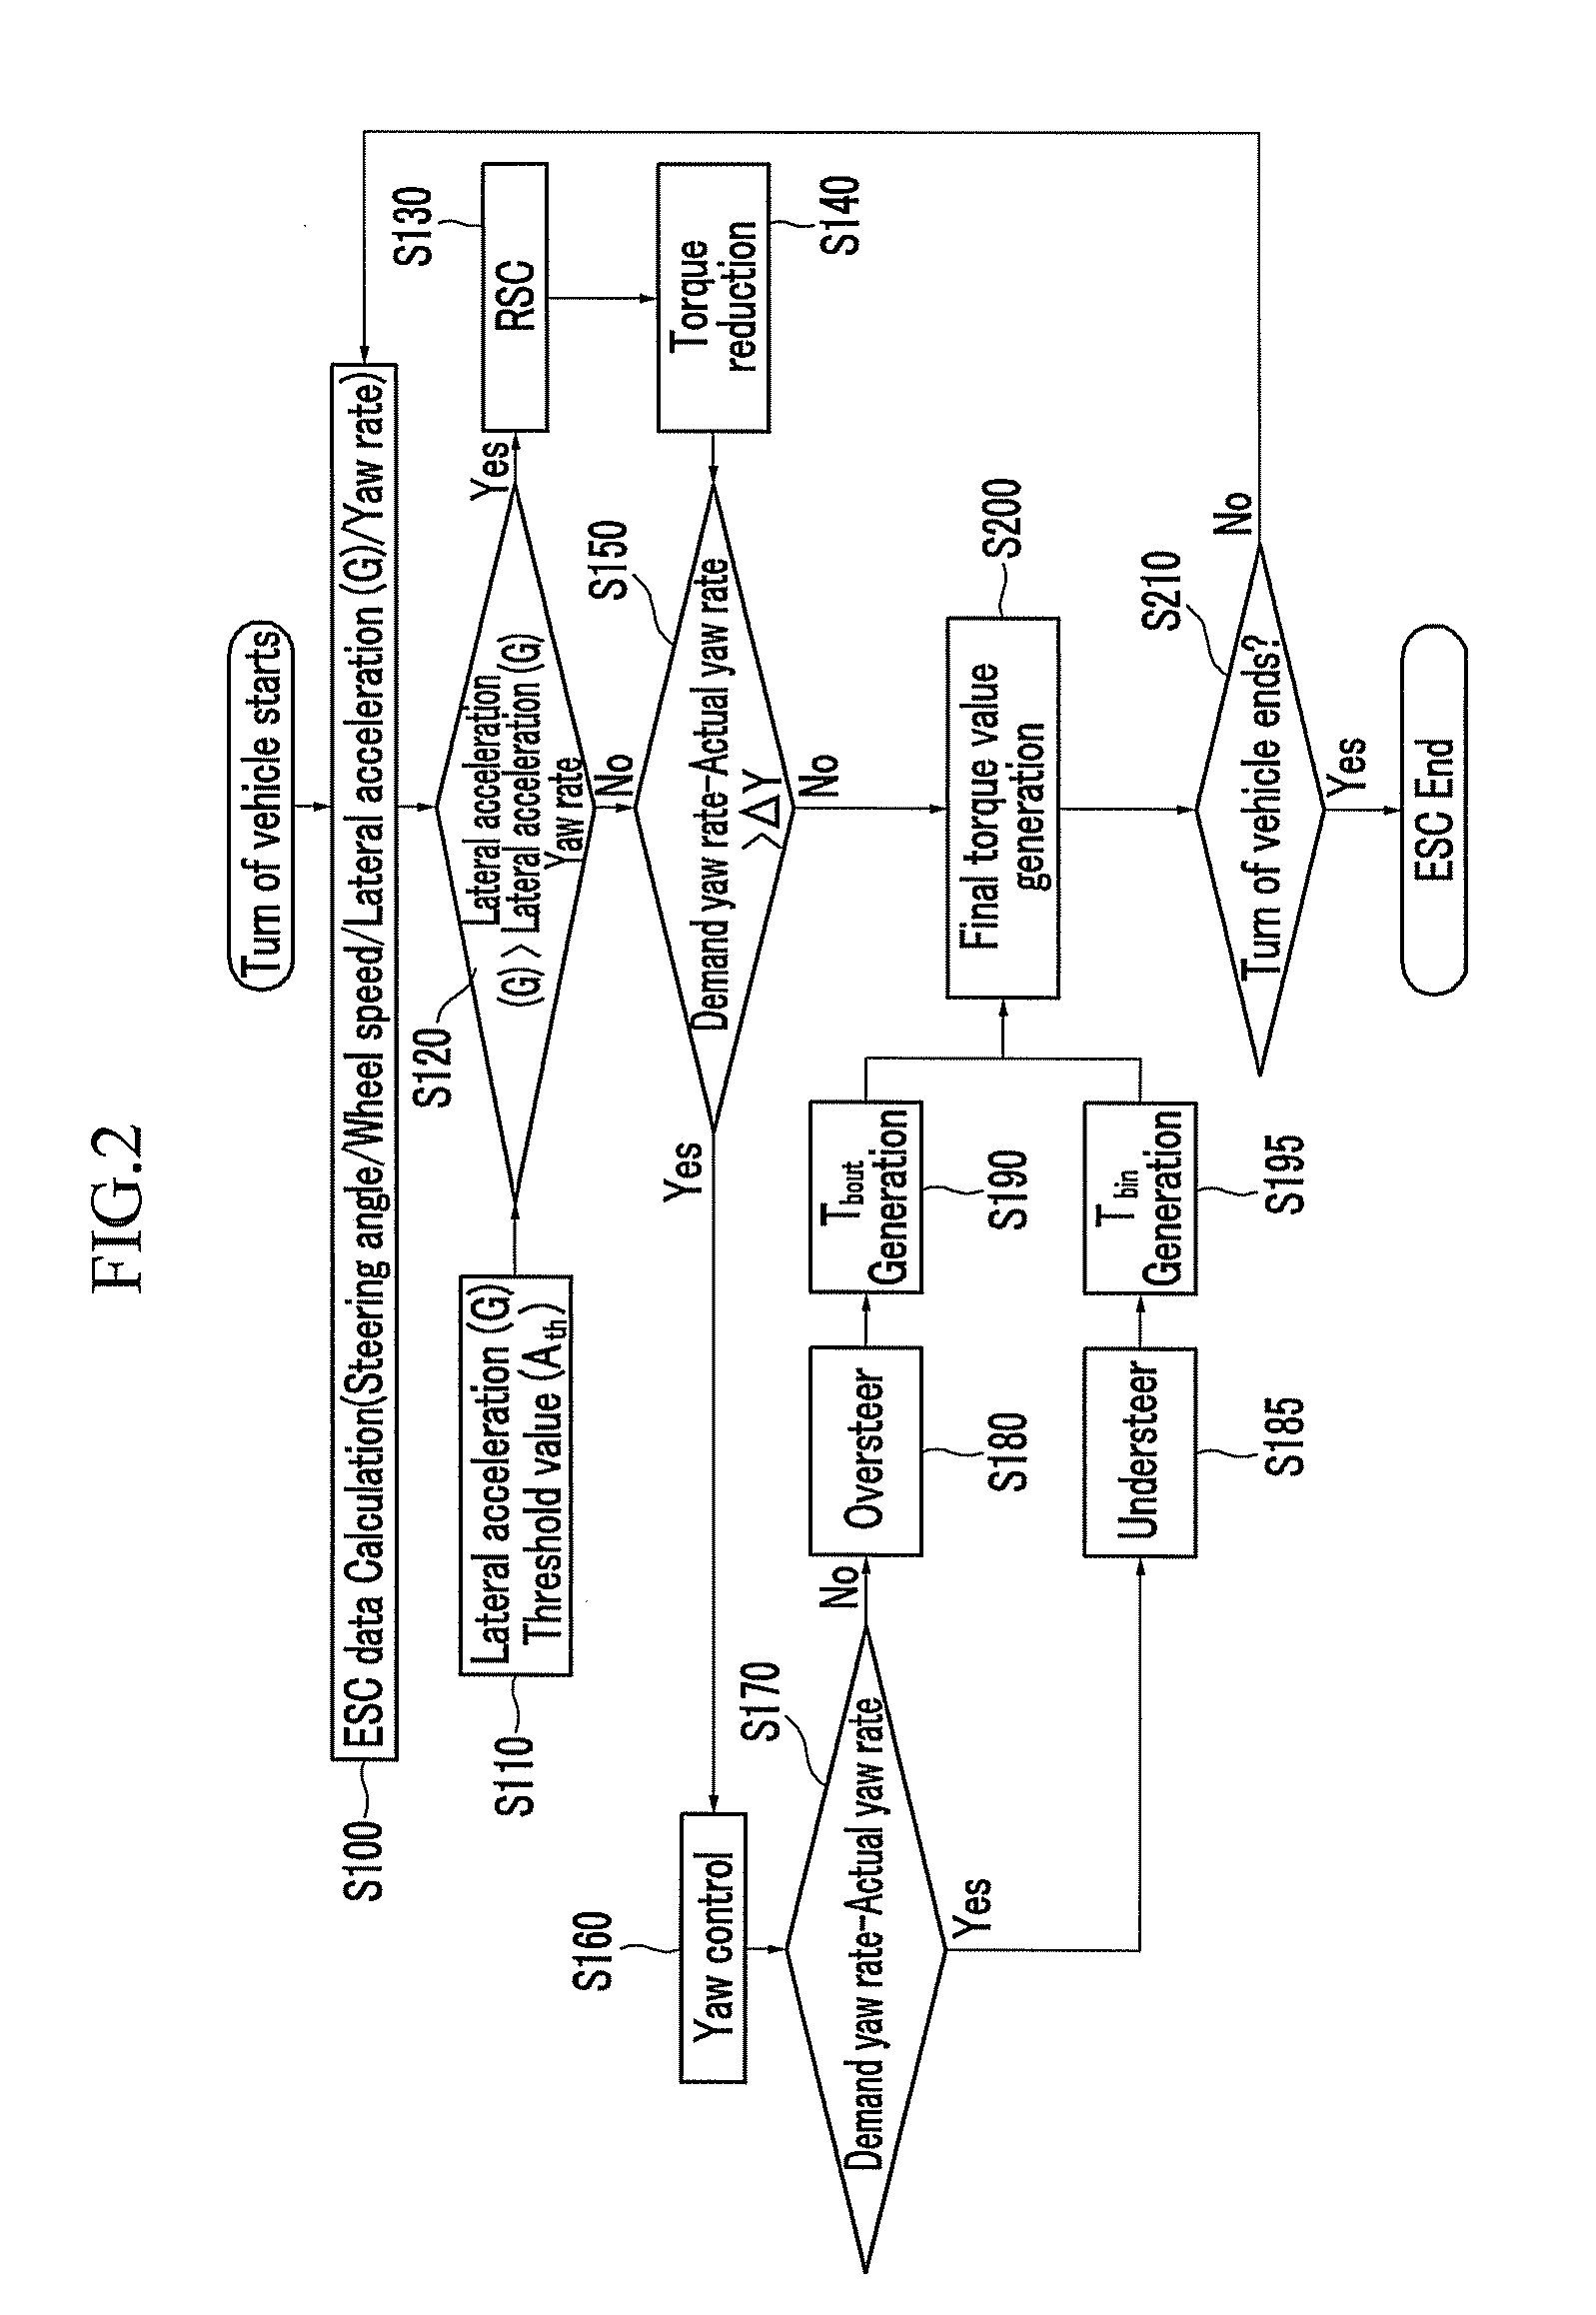 Control system and method of vehicle using in-wheel motor